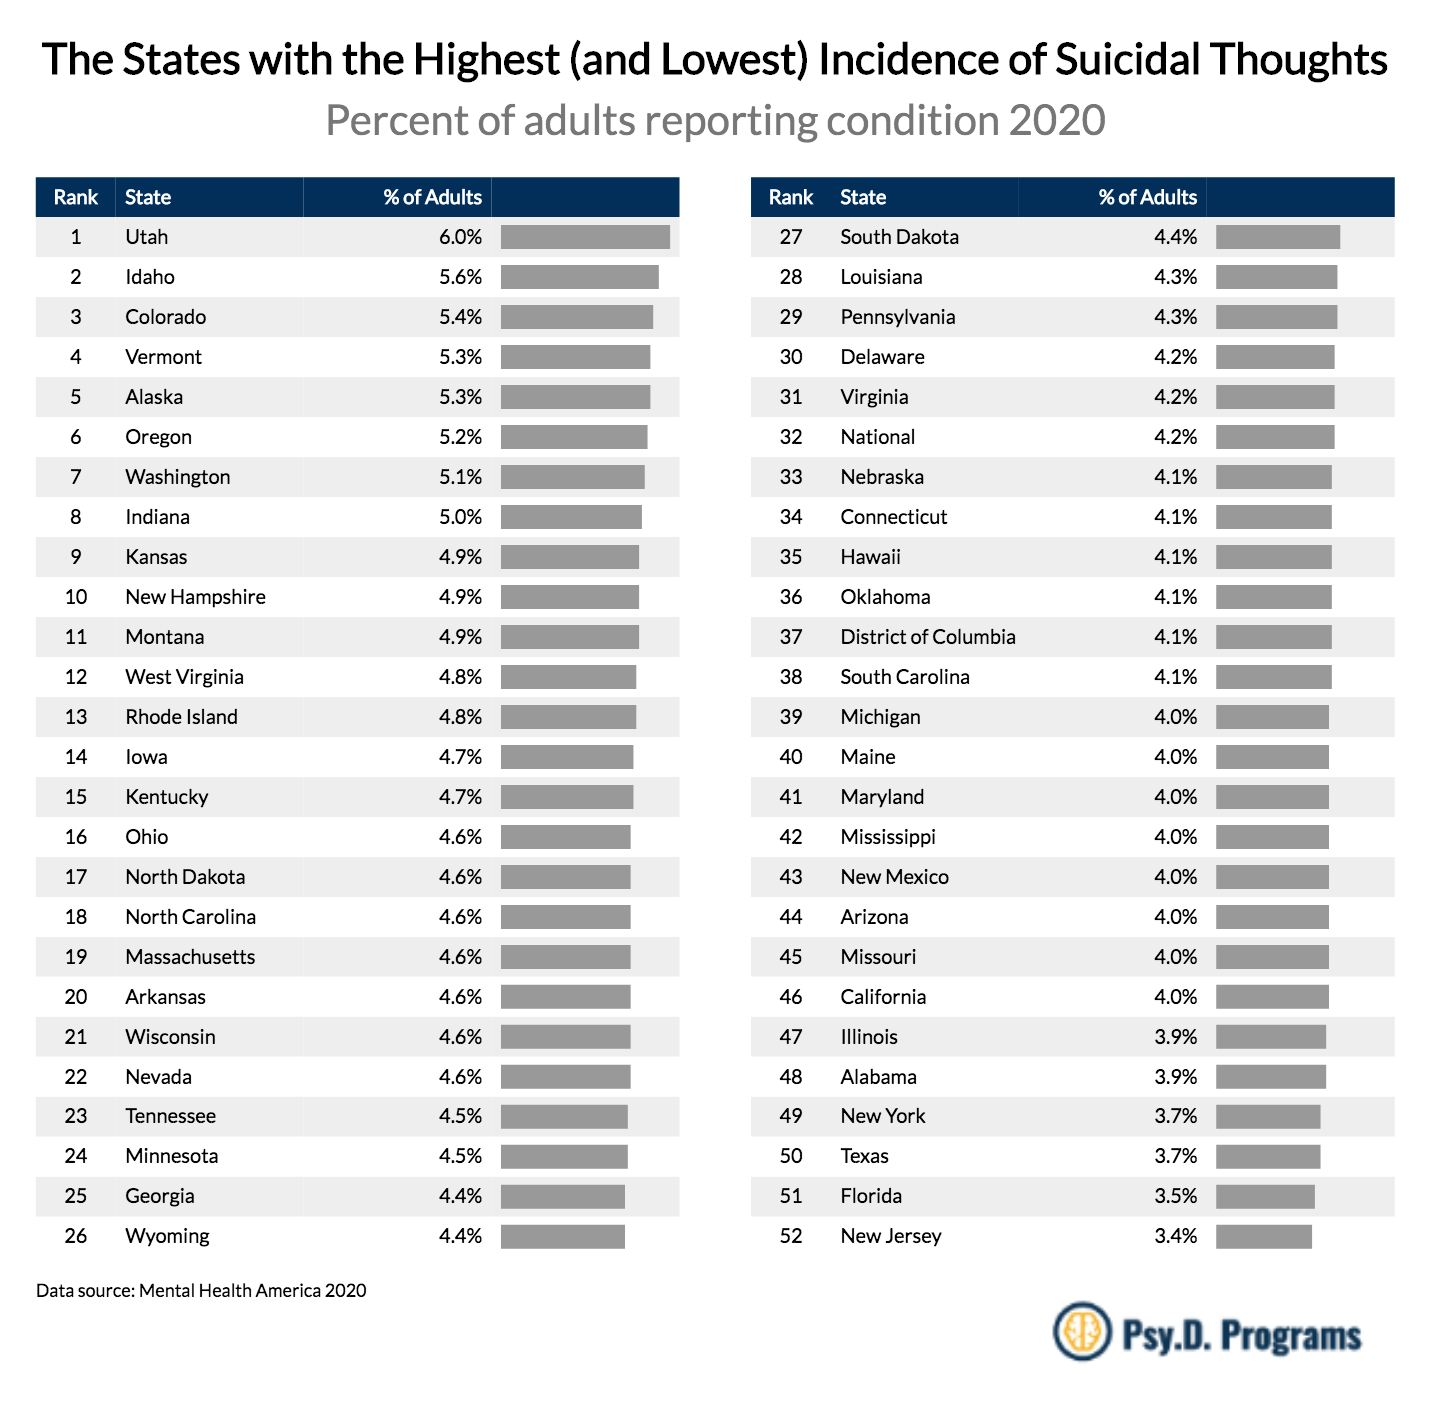 The States with the Highest (and Lowest) Incidence of Mental Health